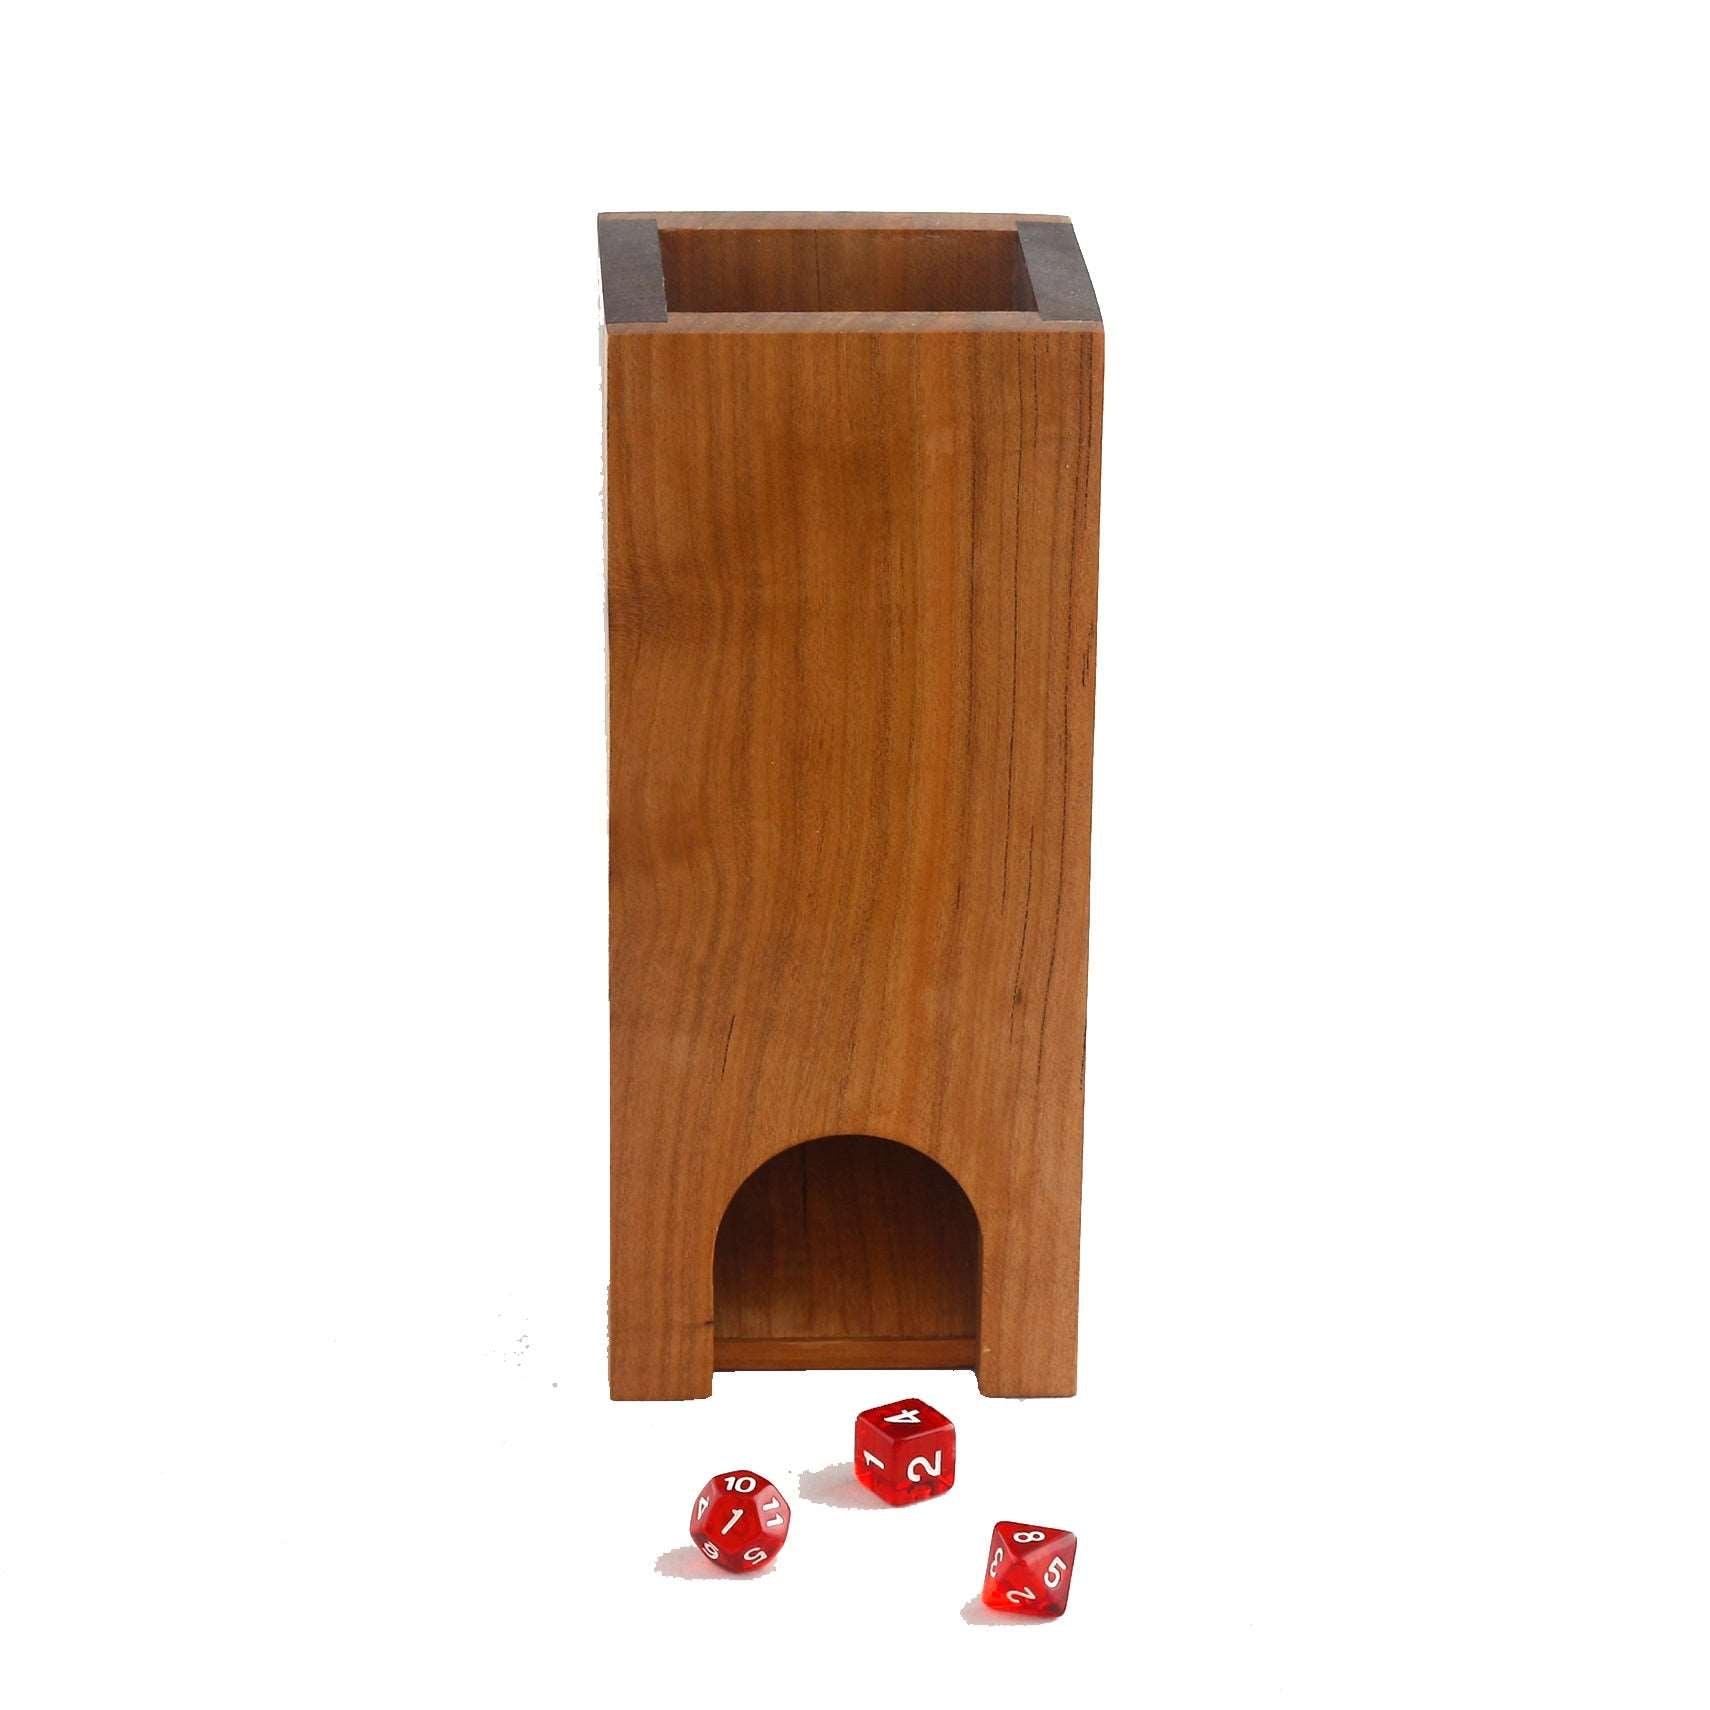 Premium hardwood dice tower made from cherry and walnut.  The front and back are made from cherry and the sides are walnut.